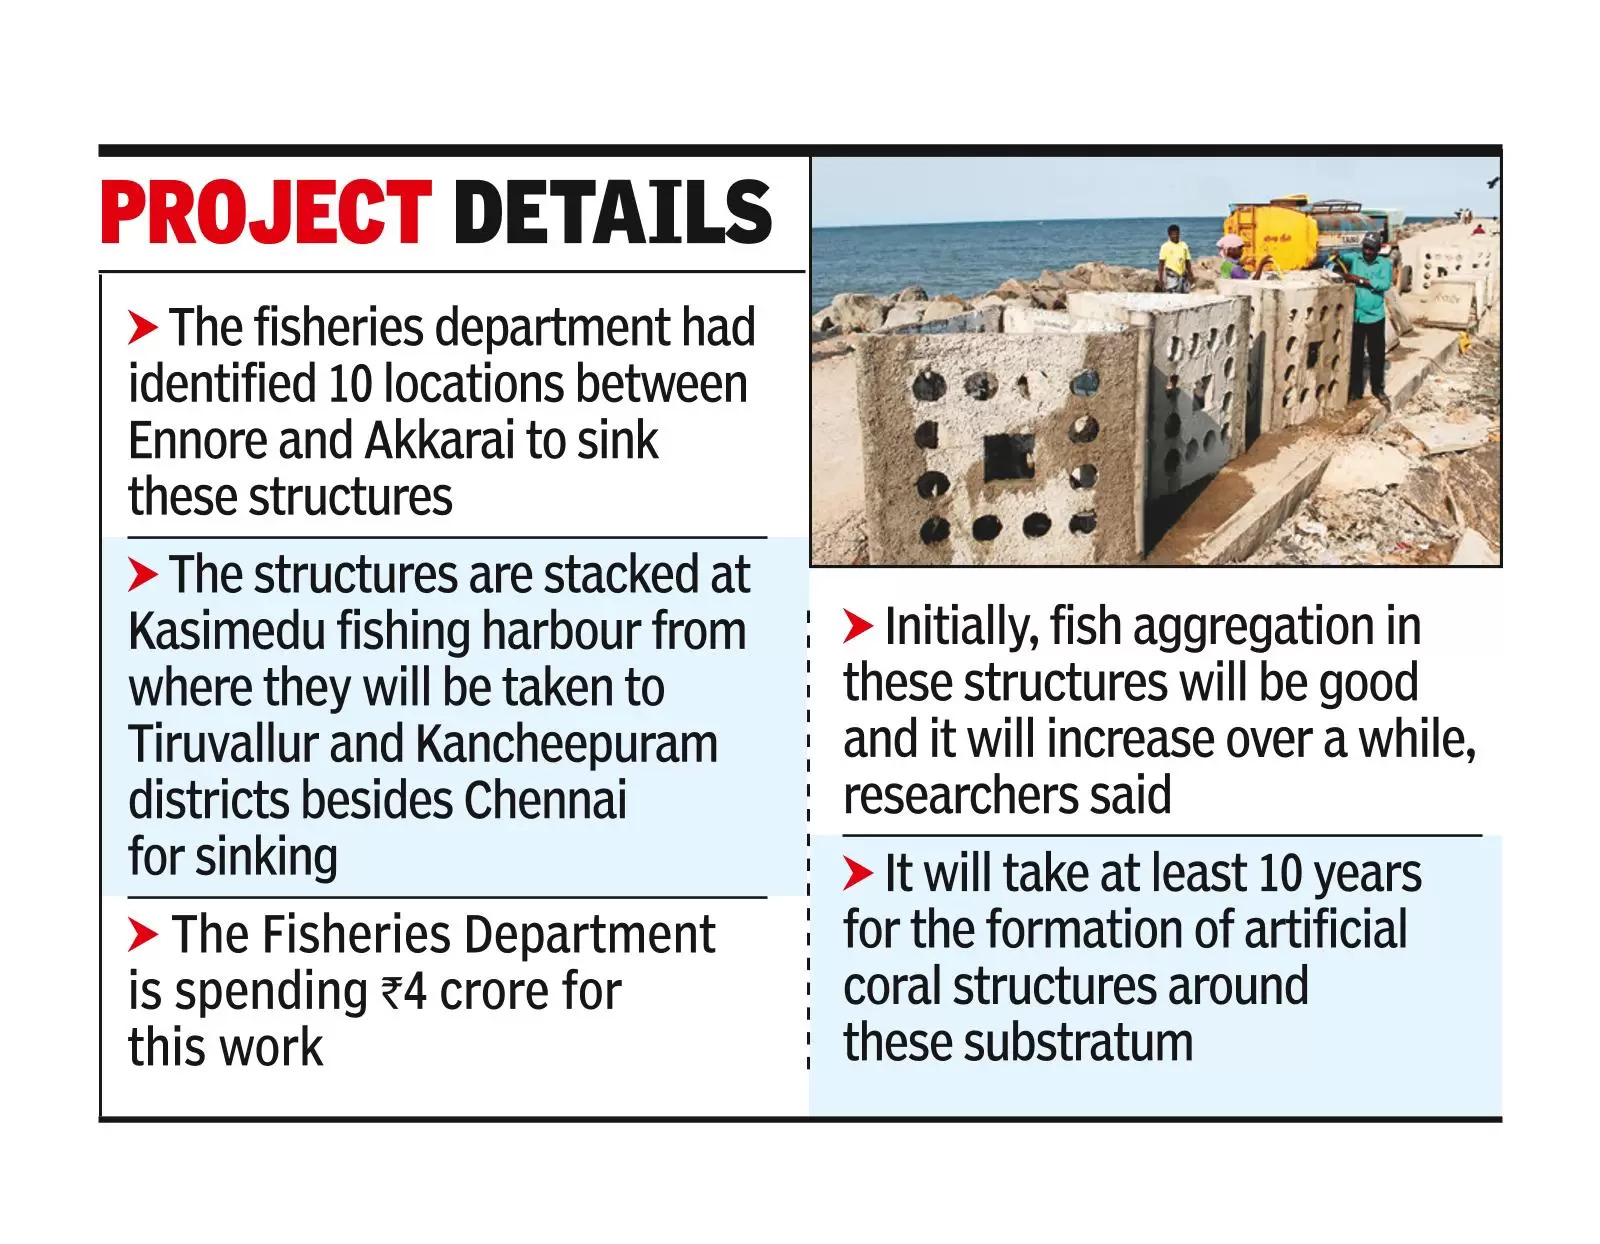 Concrete ‘reefs’ to help fish, coral colonies off East Coast